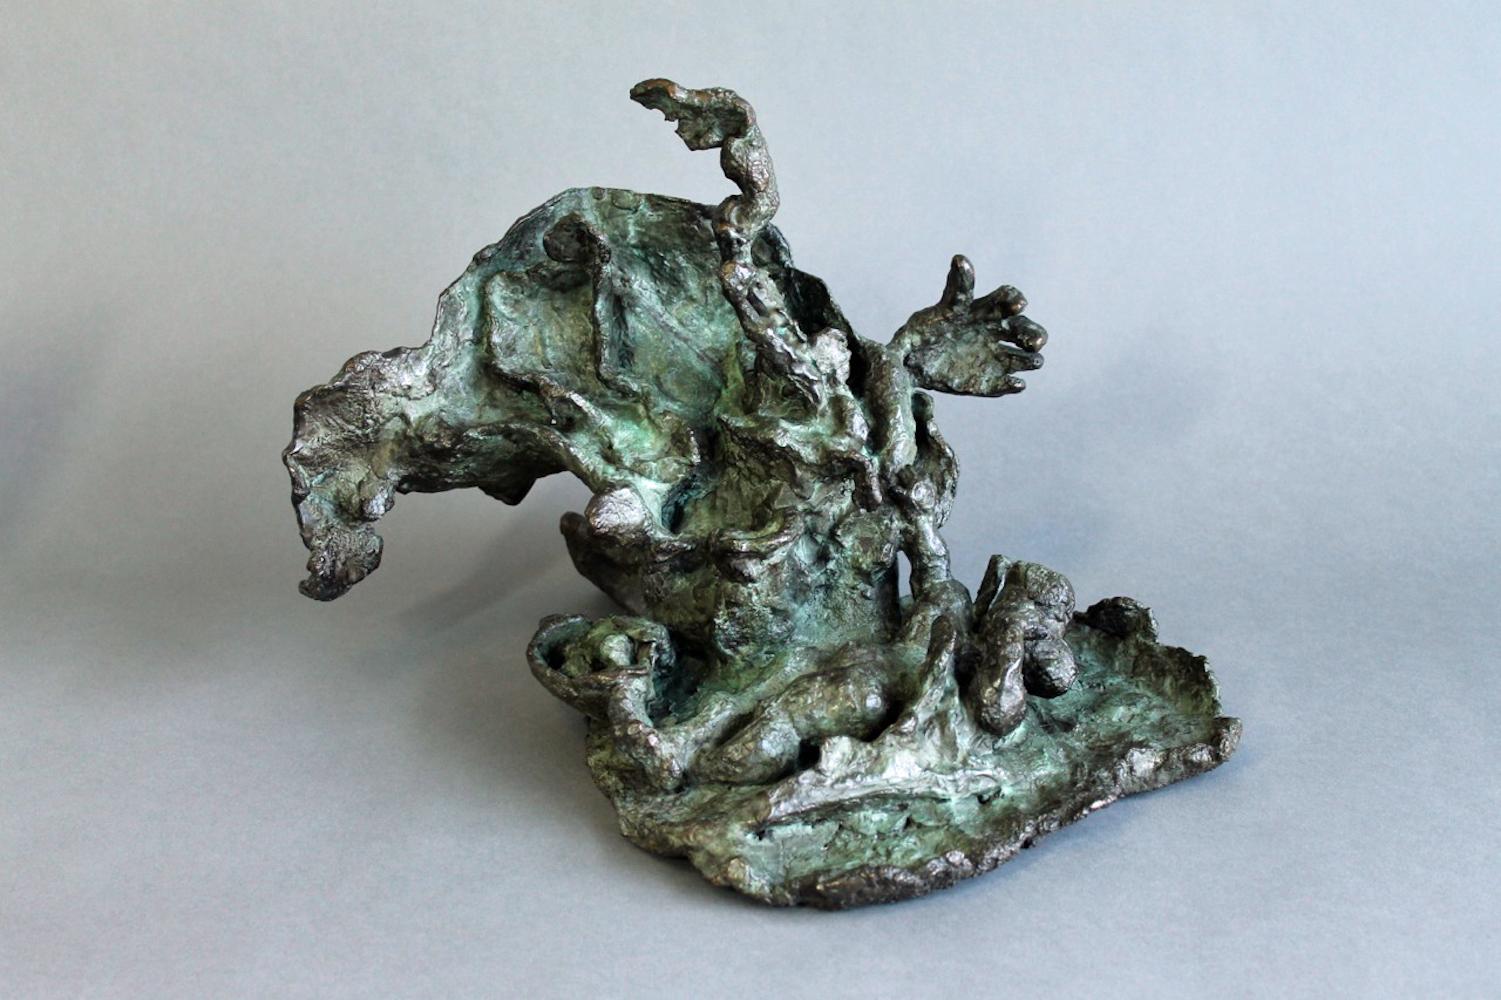 Organic, abstract bronze sculpture by Yulla Lipchitz of a reclined woman. 

About this artist: Yulla Lipchitz, née Halberstadt, was born on April 21, 1911 in Berlin, Germany. While growing up in a strict, Jewish Orthodox family, she was forbidden to